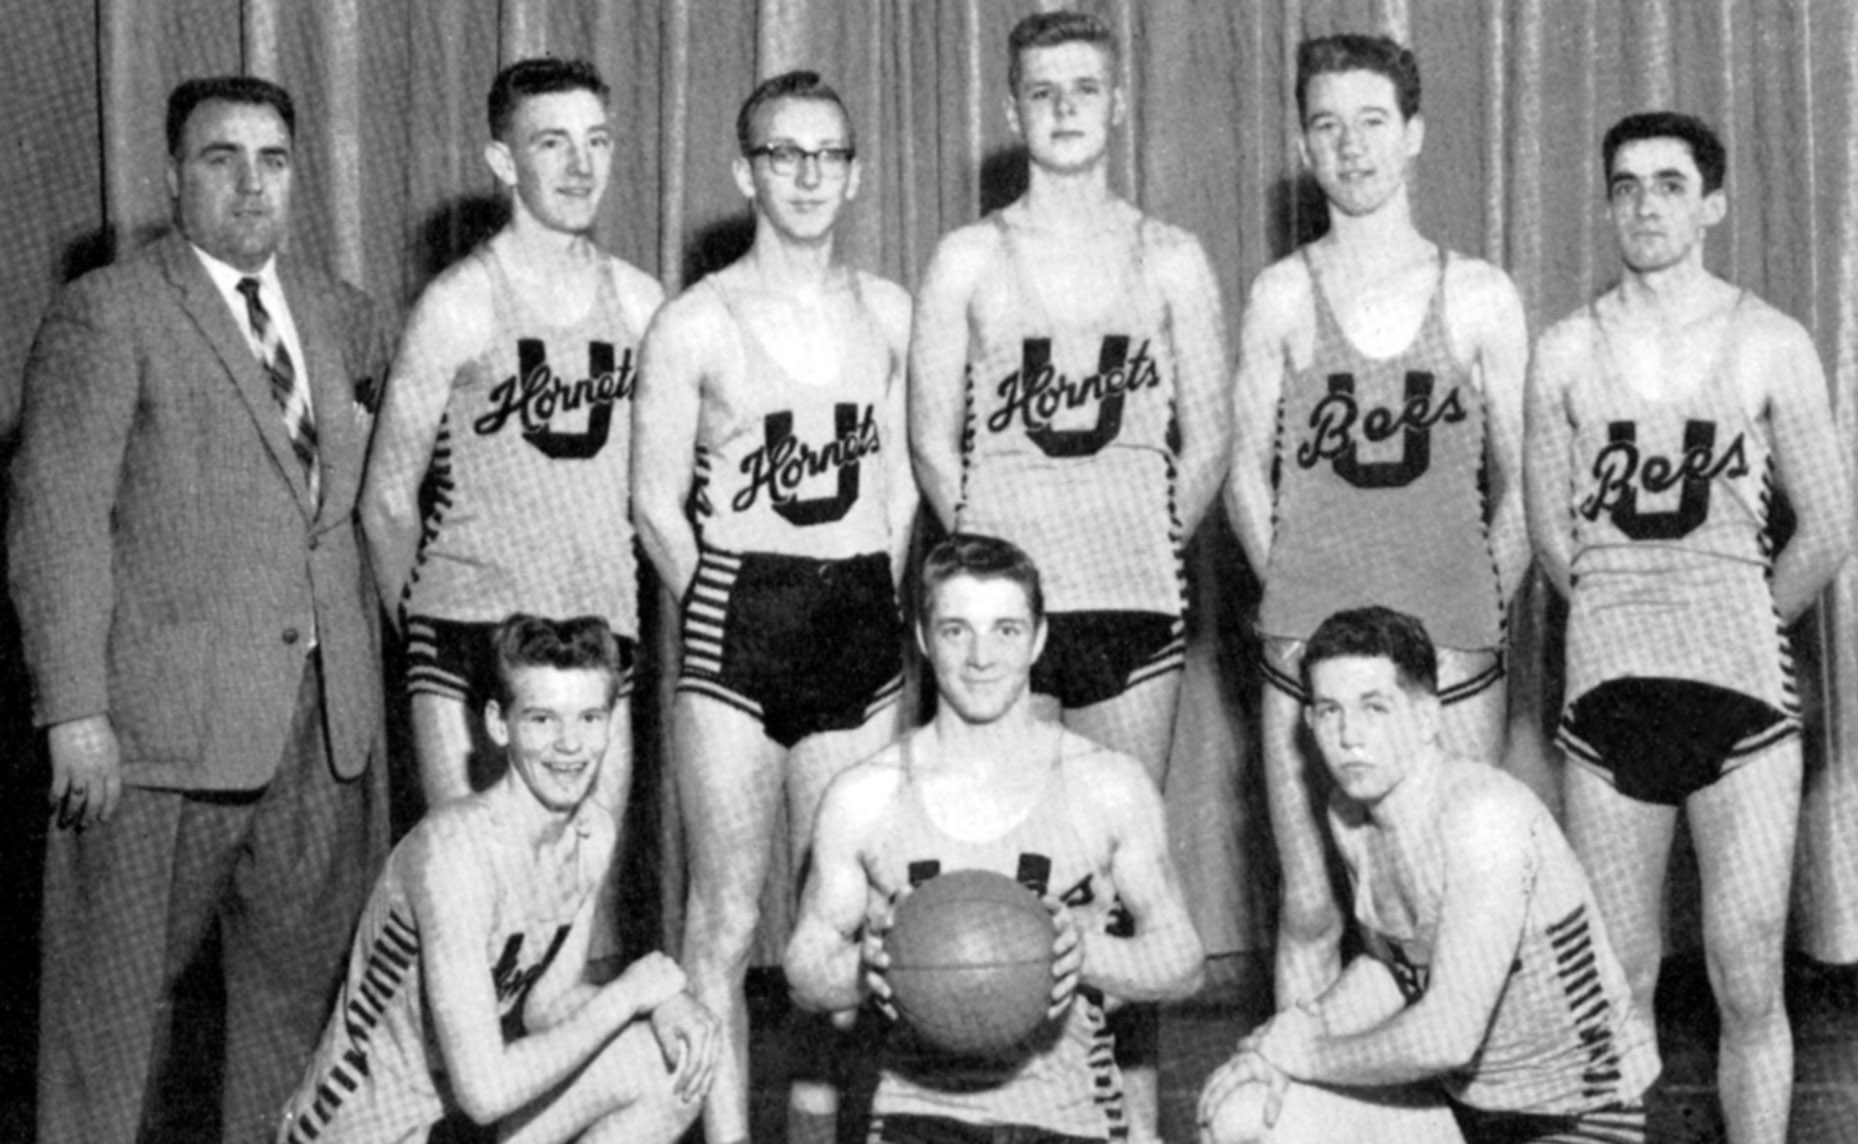 (Click to magnify): FRONT ROW: Jack Ballinger, L. Taylor, J. Sargeant; BACK ROW: Mr. Ray Newton, K. May, D. Whitney, P. Harris, Murray Prentice, Bruce Shillinglaw.